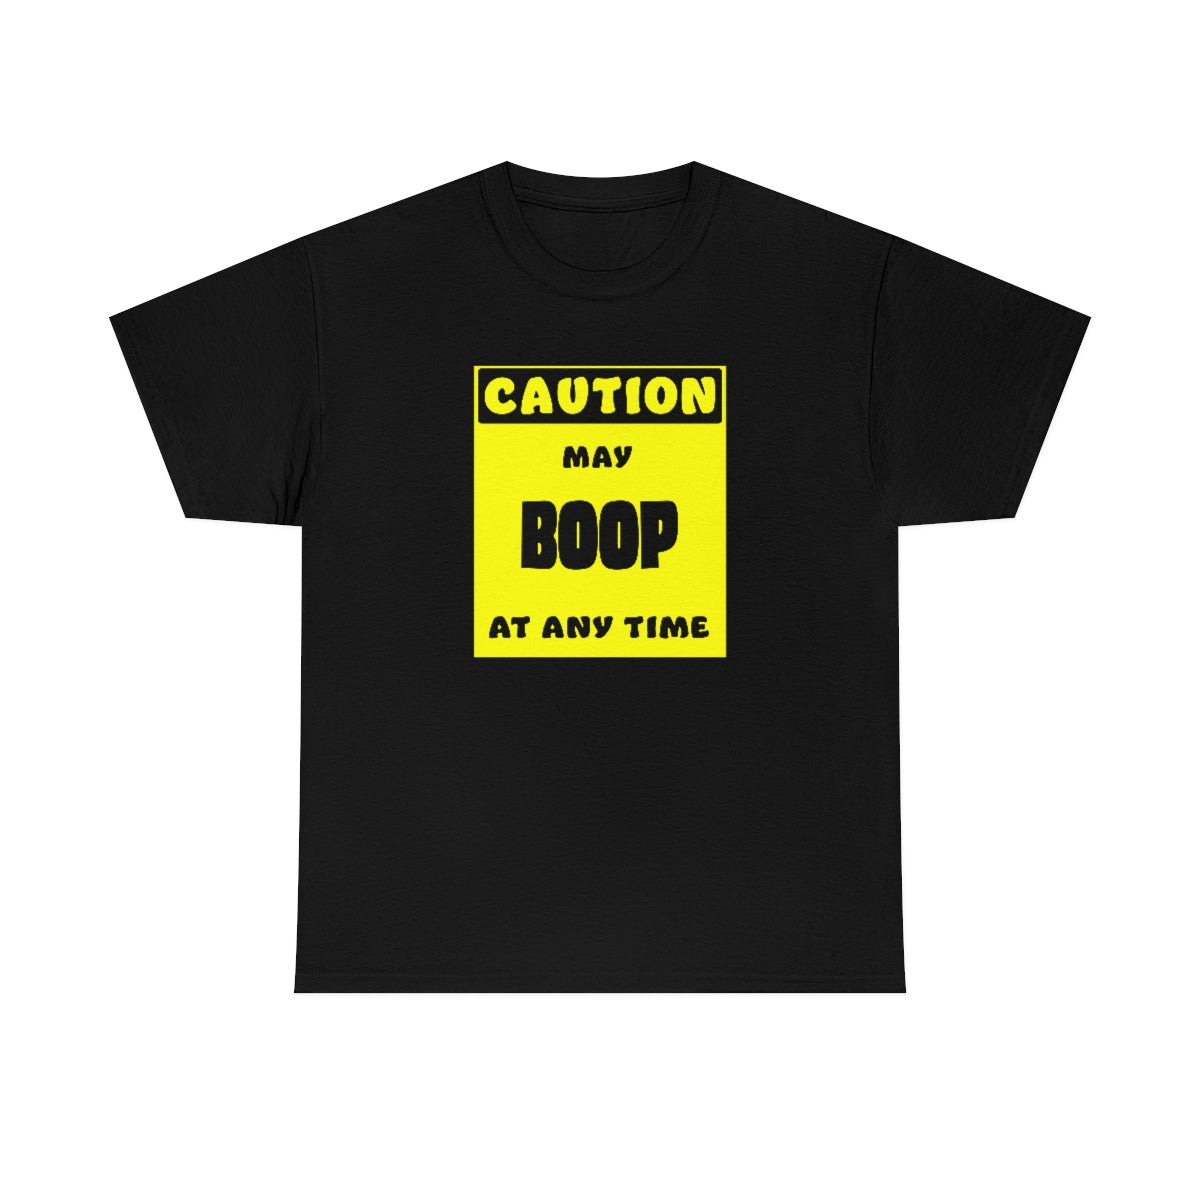 CAUTION! May BOOP at any time! - T-Shirt T-Shirt AFLT-Whootorca Black S 